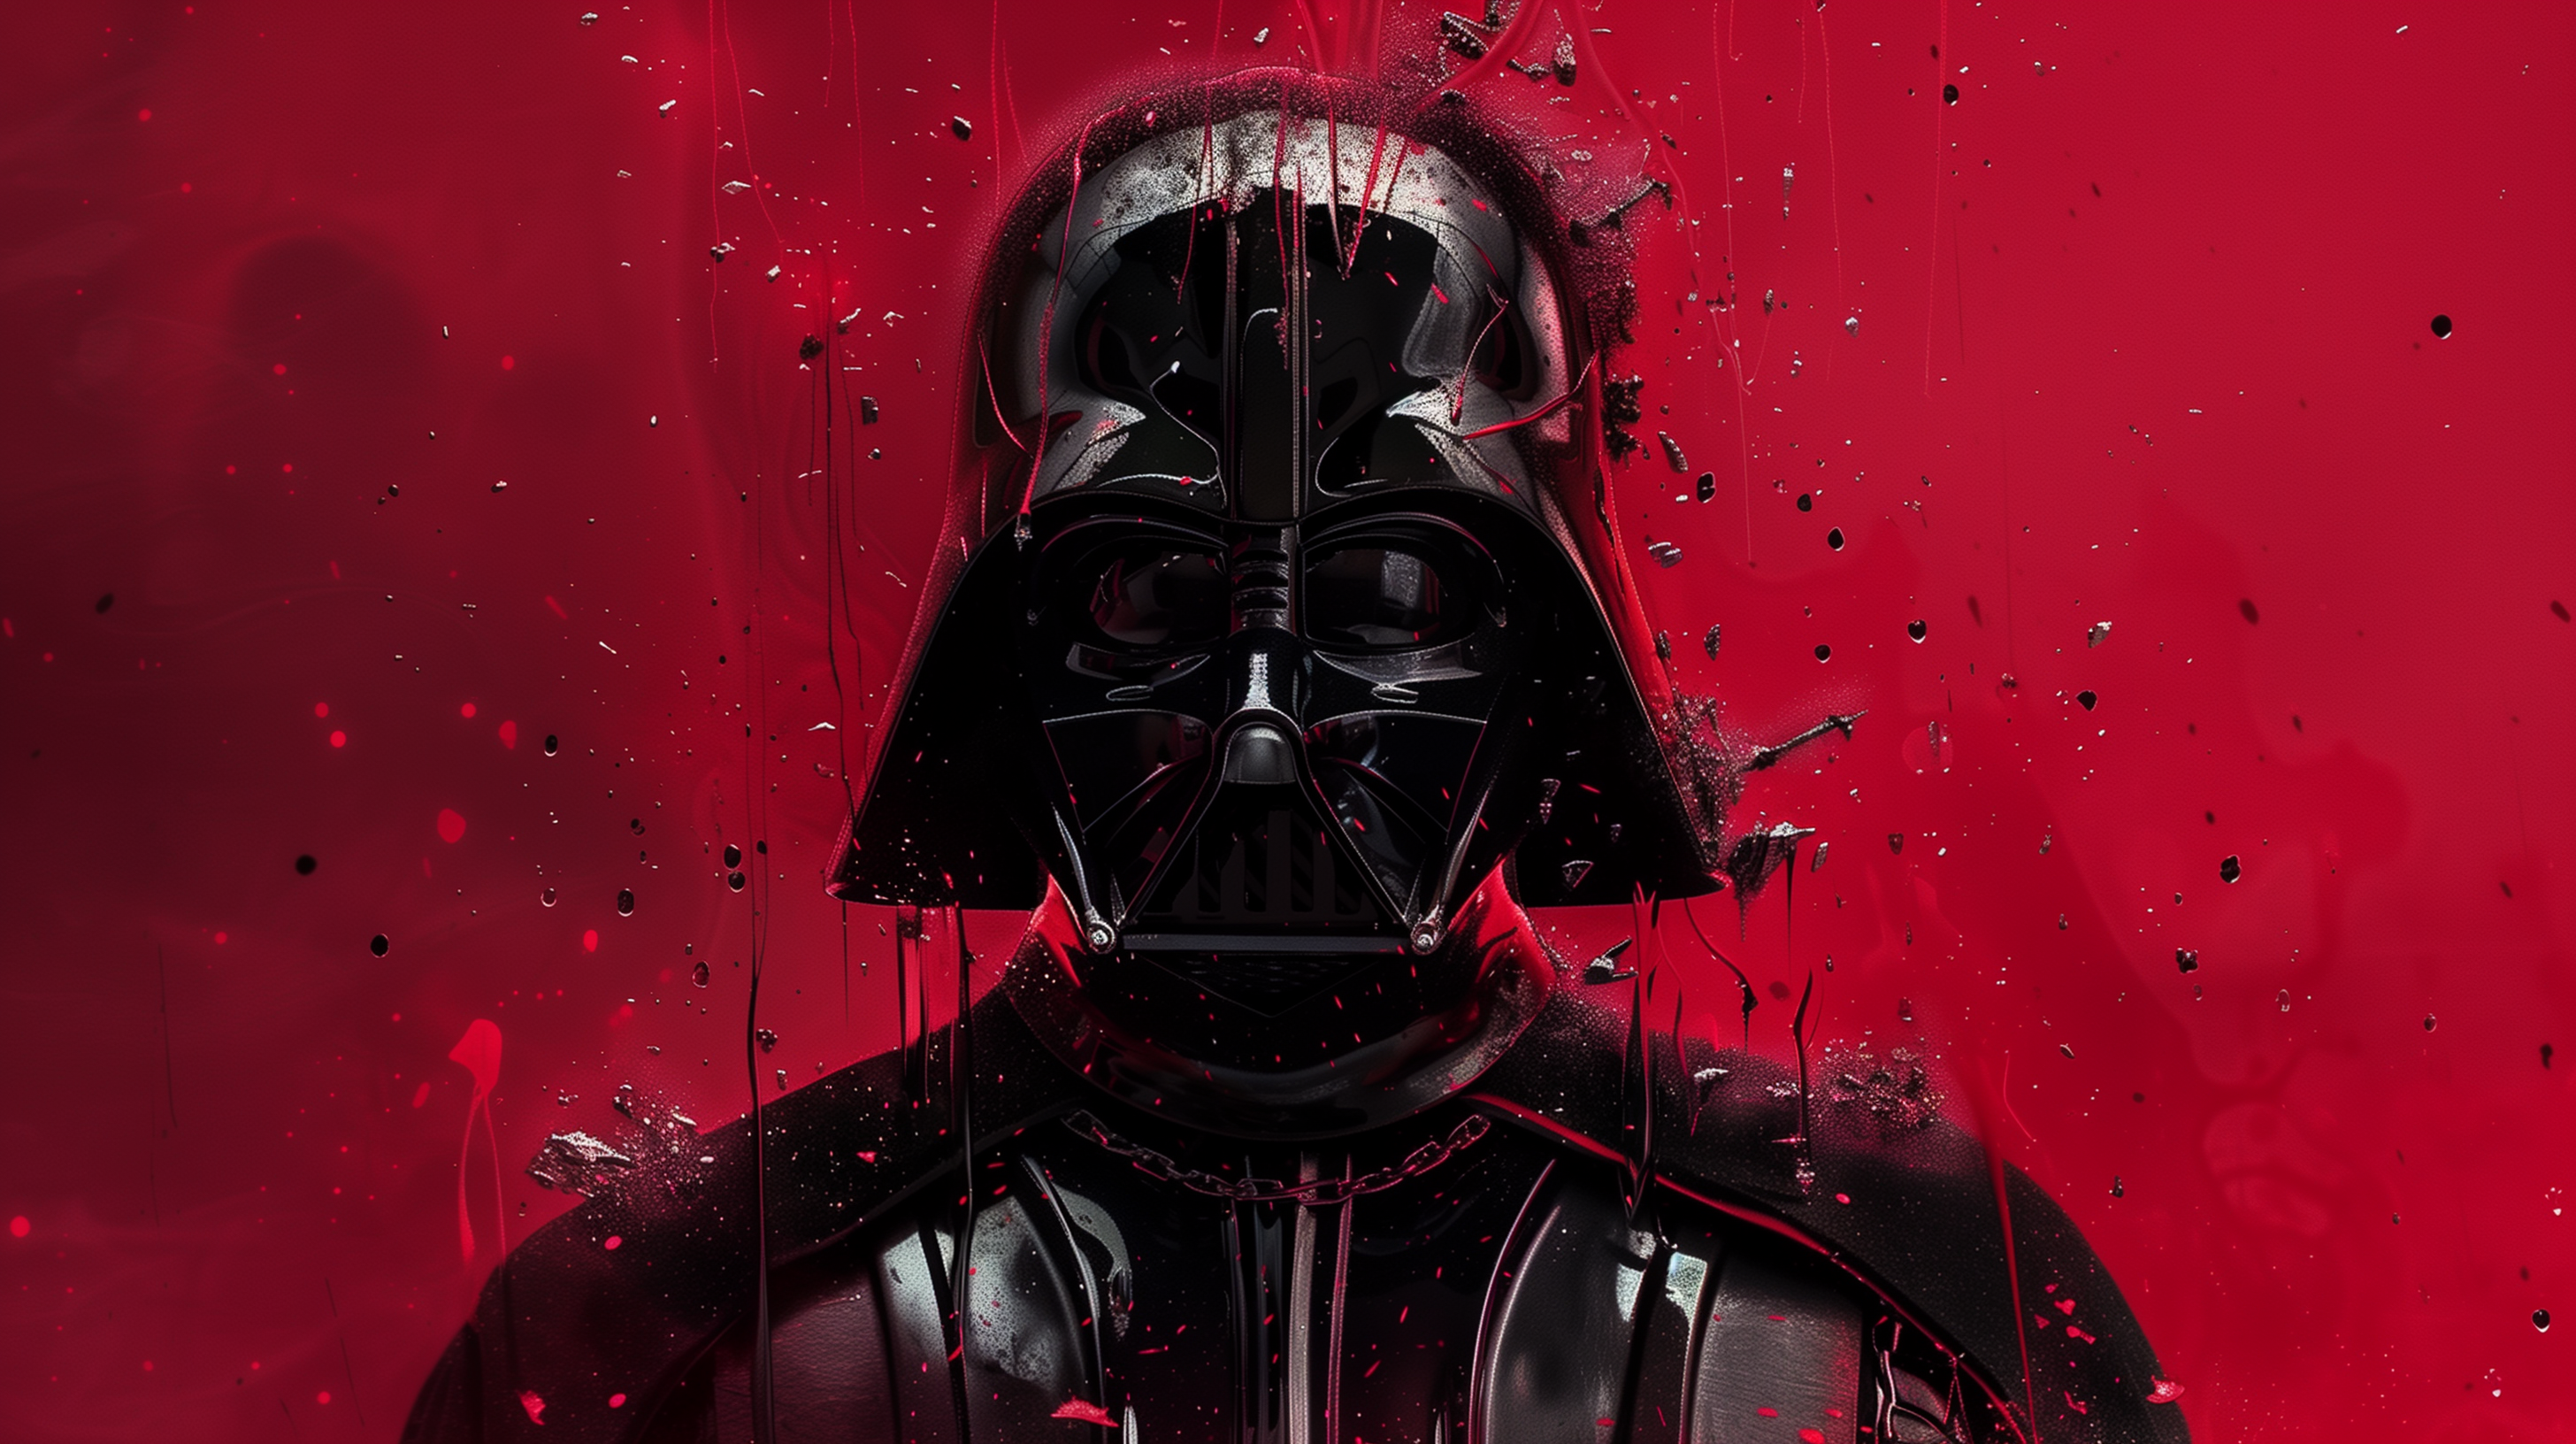 Lord Darth Vader'S Wallpaper With Army 8-490 - Wallyboards online store